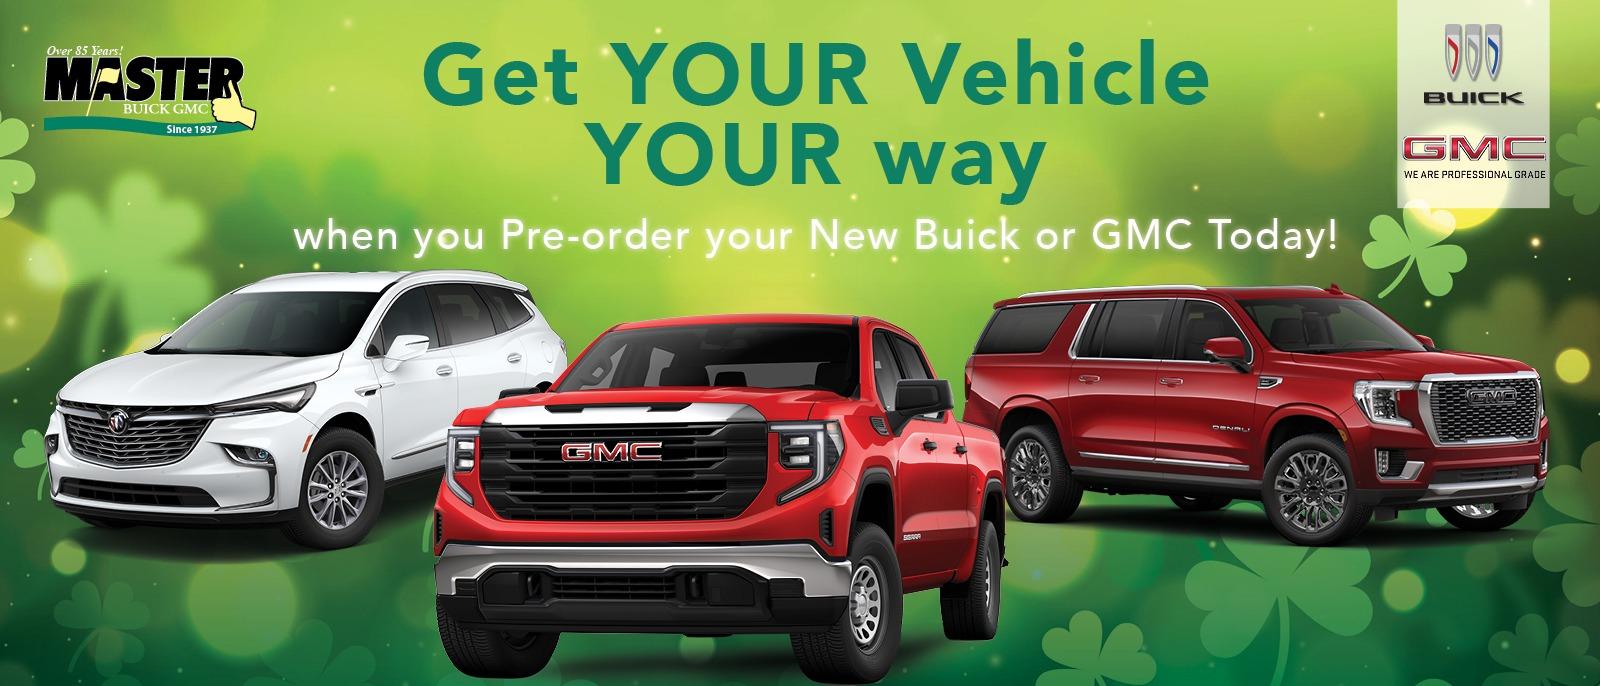 Get YOUR vehicle YOUR way when you pre-order your new Buick or GMC TODAY!